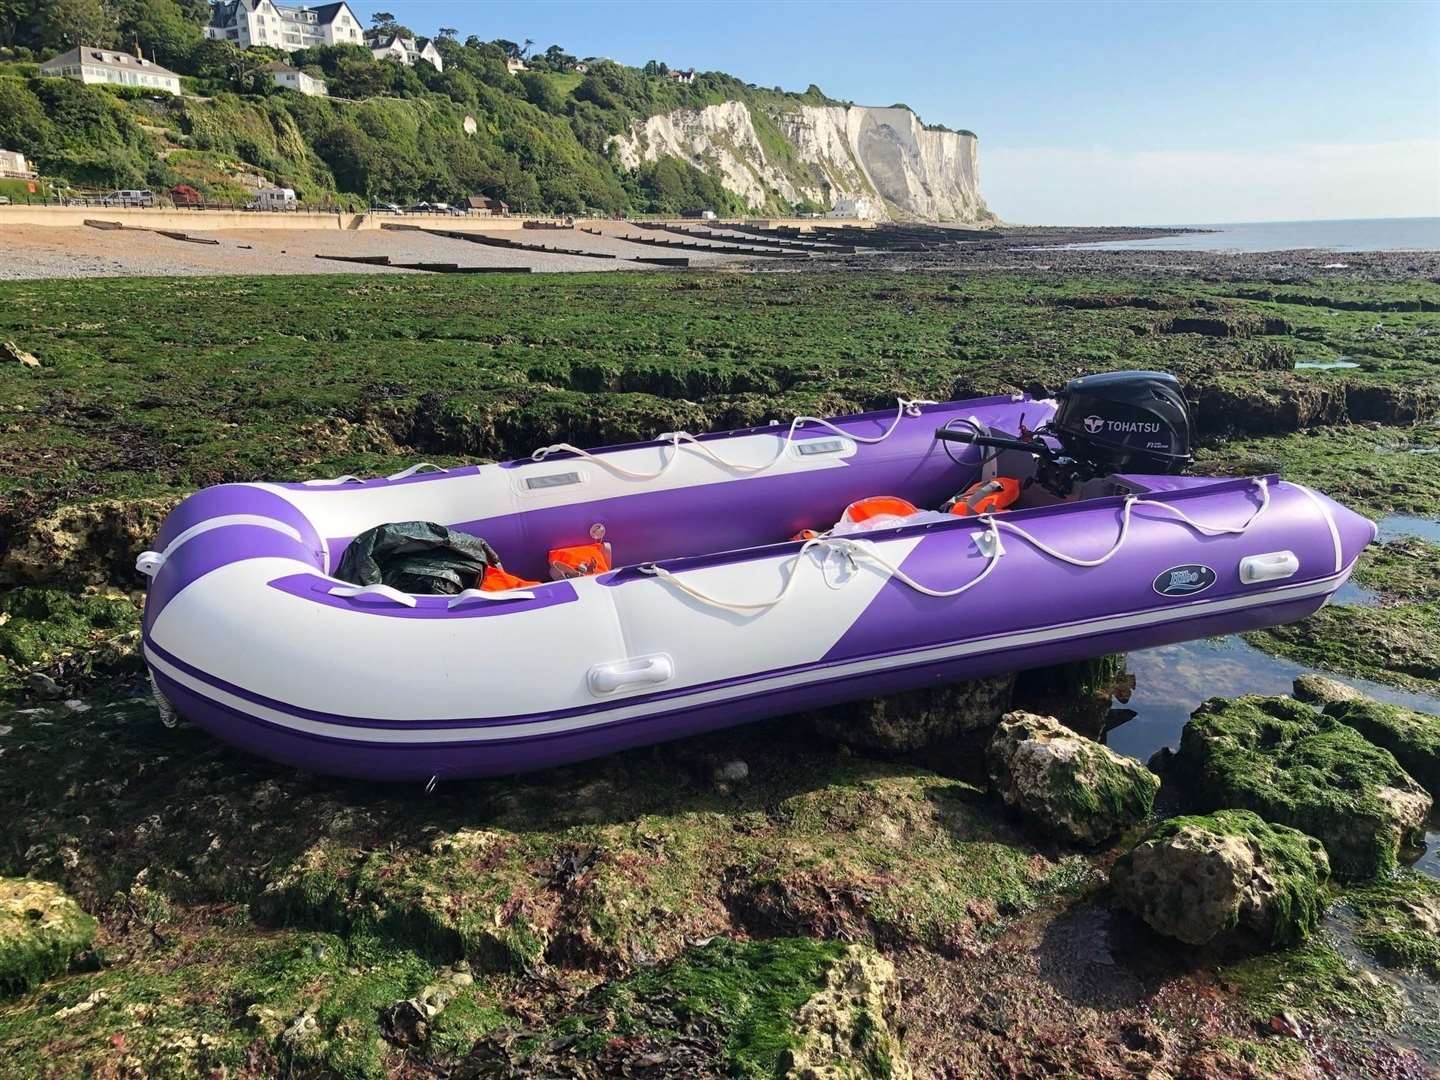 An abandoned dinghy found at St Margarets Bay in July 2019